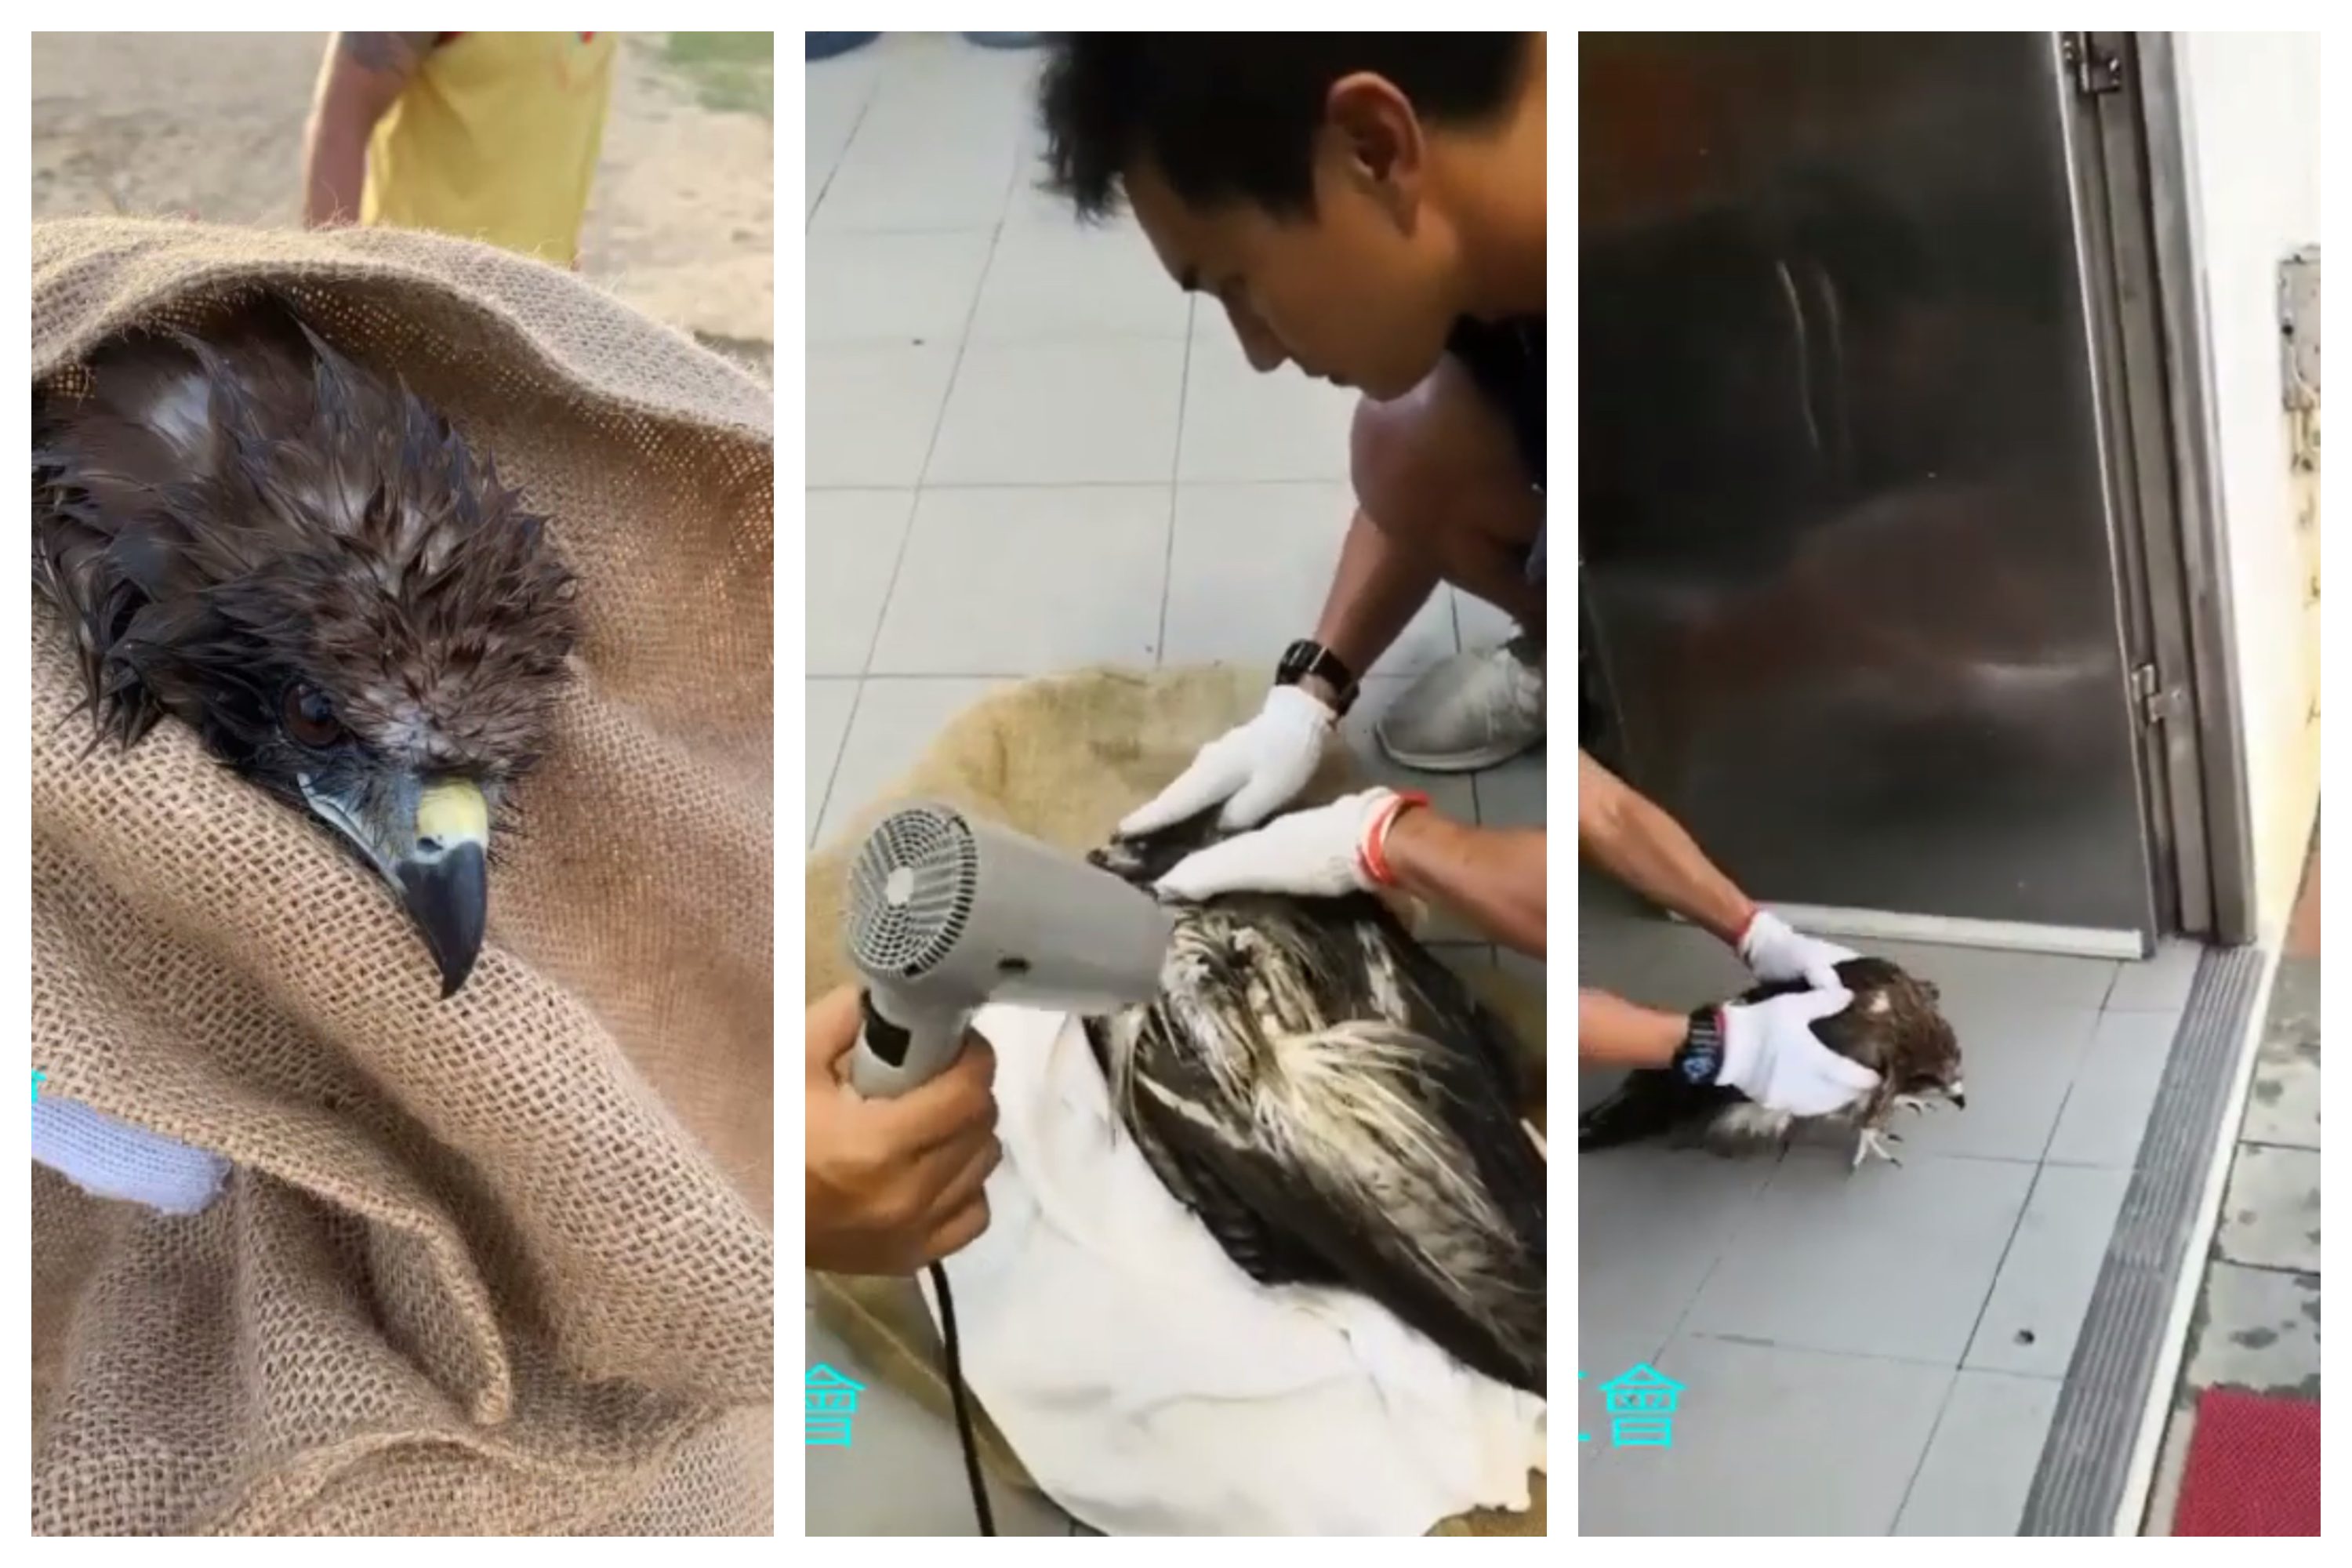 A black kite rescued by a group of lifeguards yesterday. Screengrabs via YouTube.